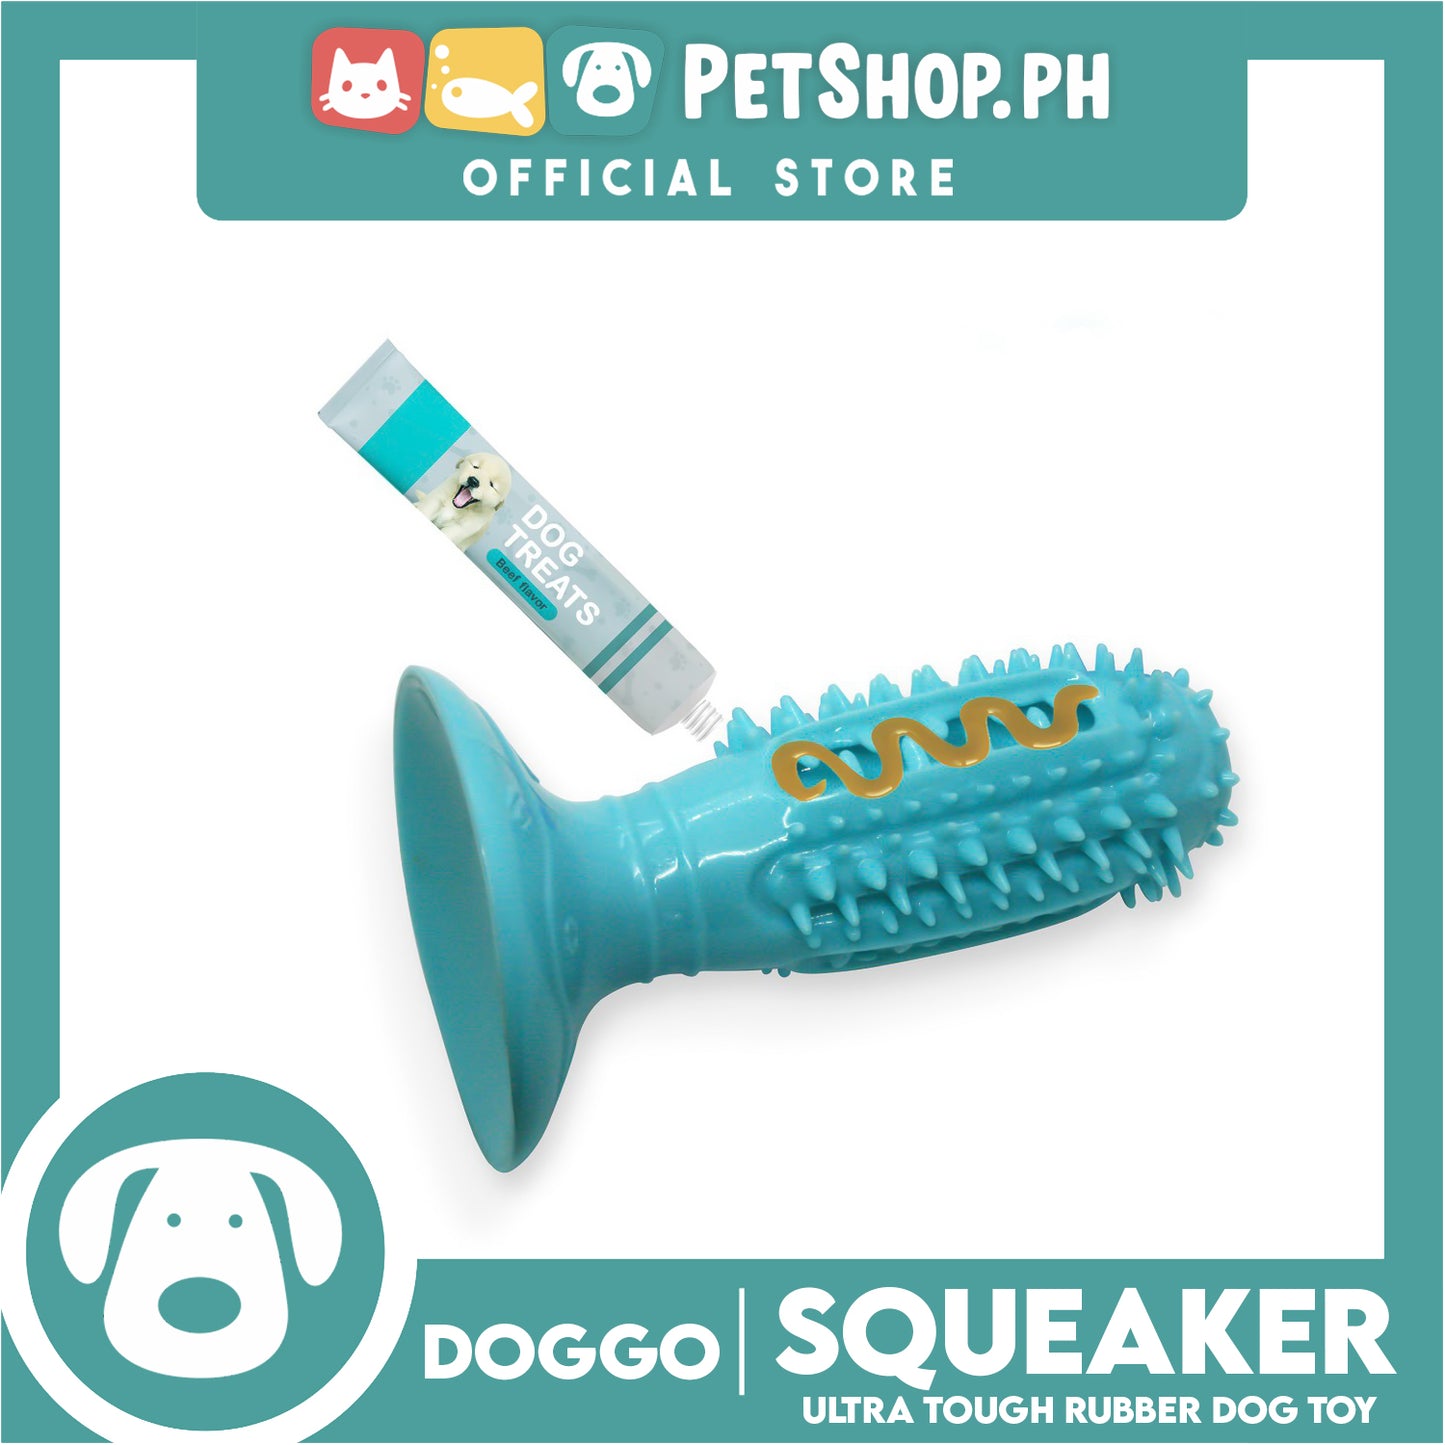 Doggo Squeaker Thick Rubber Material for Pet Teeth Cleaning, Chewing, Fetching (Blue)